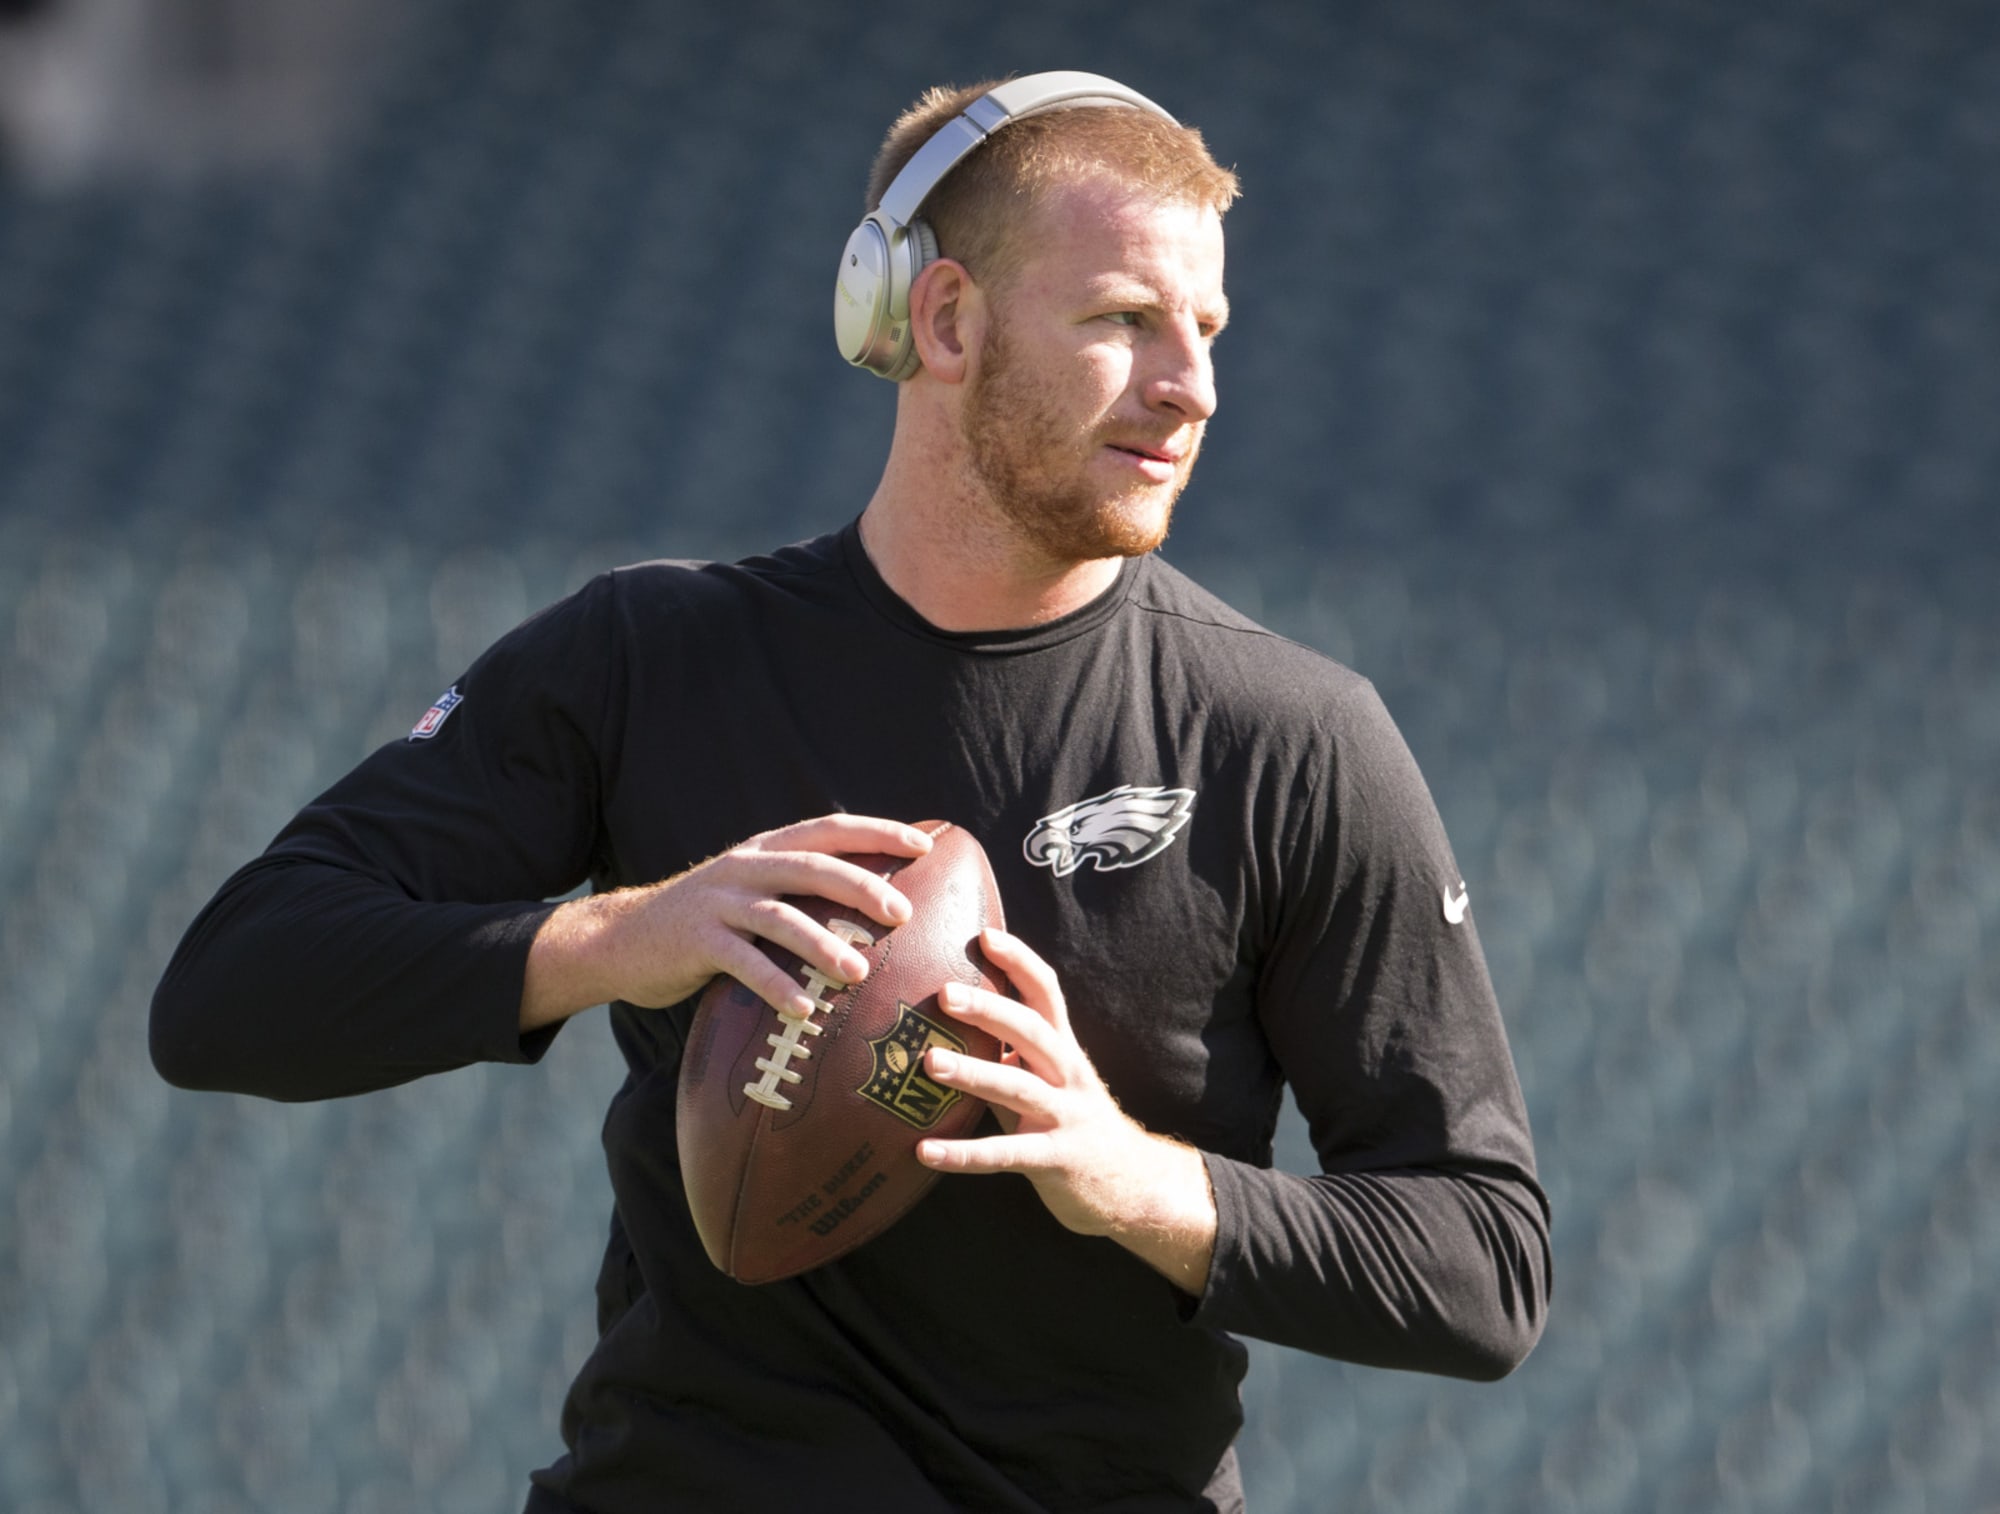 Philadelphia Eagles QB Carson Wentz shares a special moment with a fan